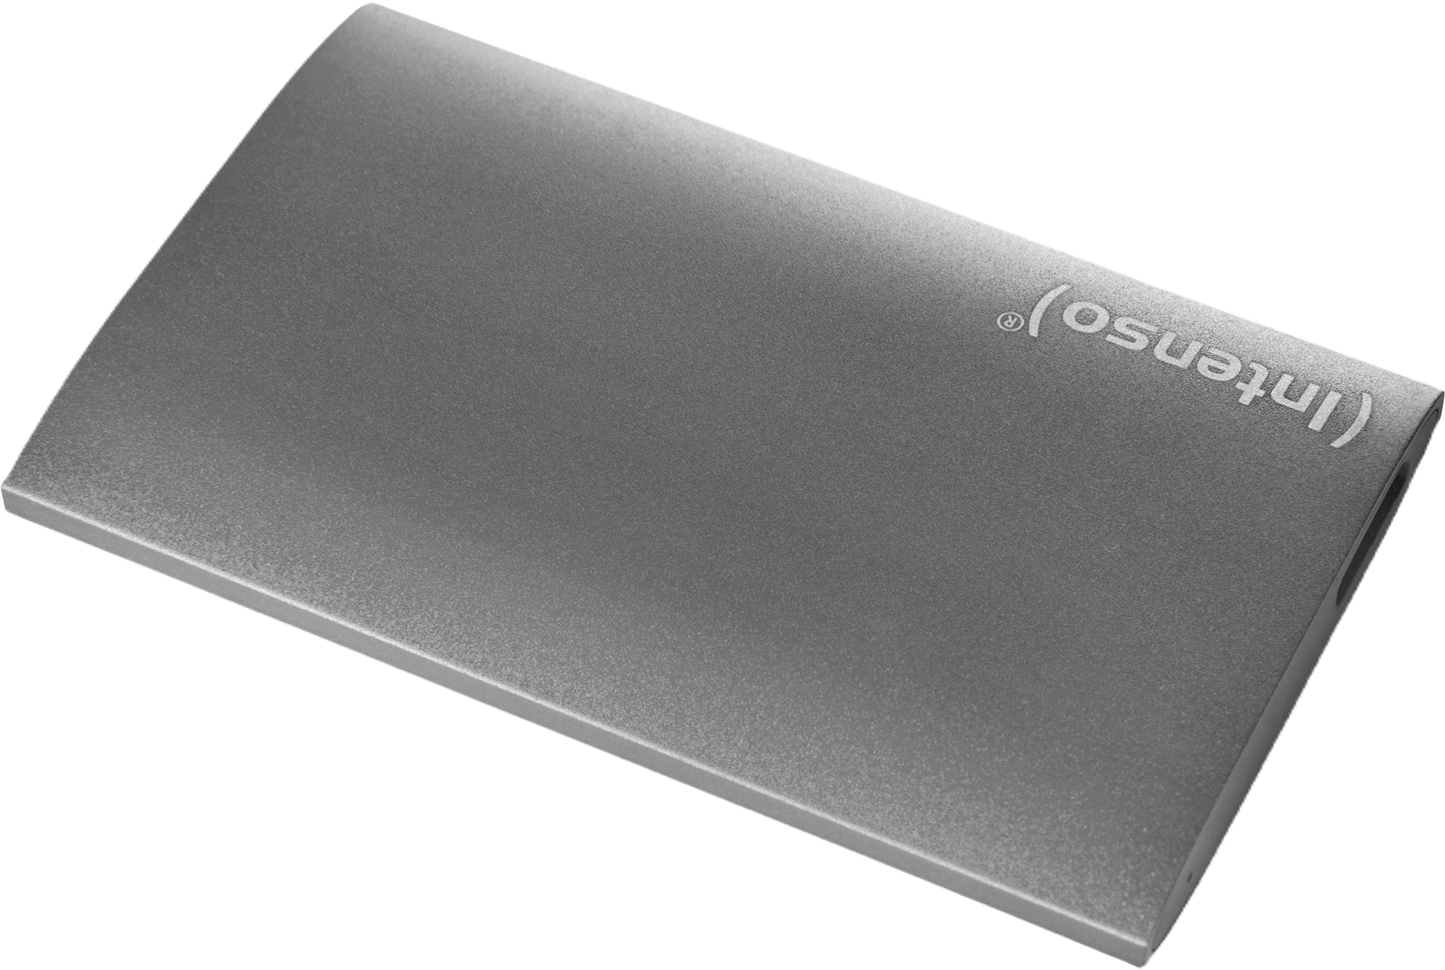 SSD externe - Premium Edition INTENSO